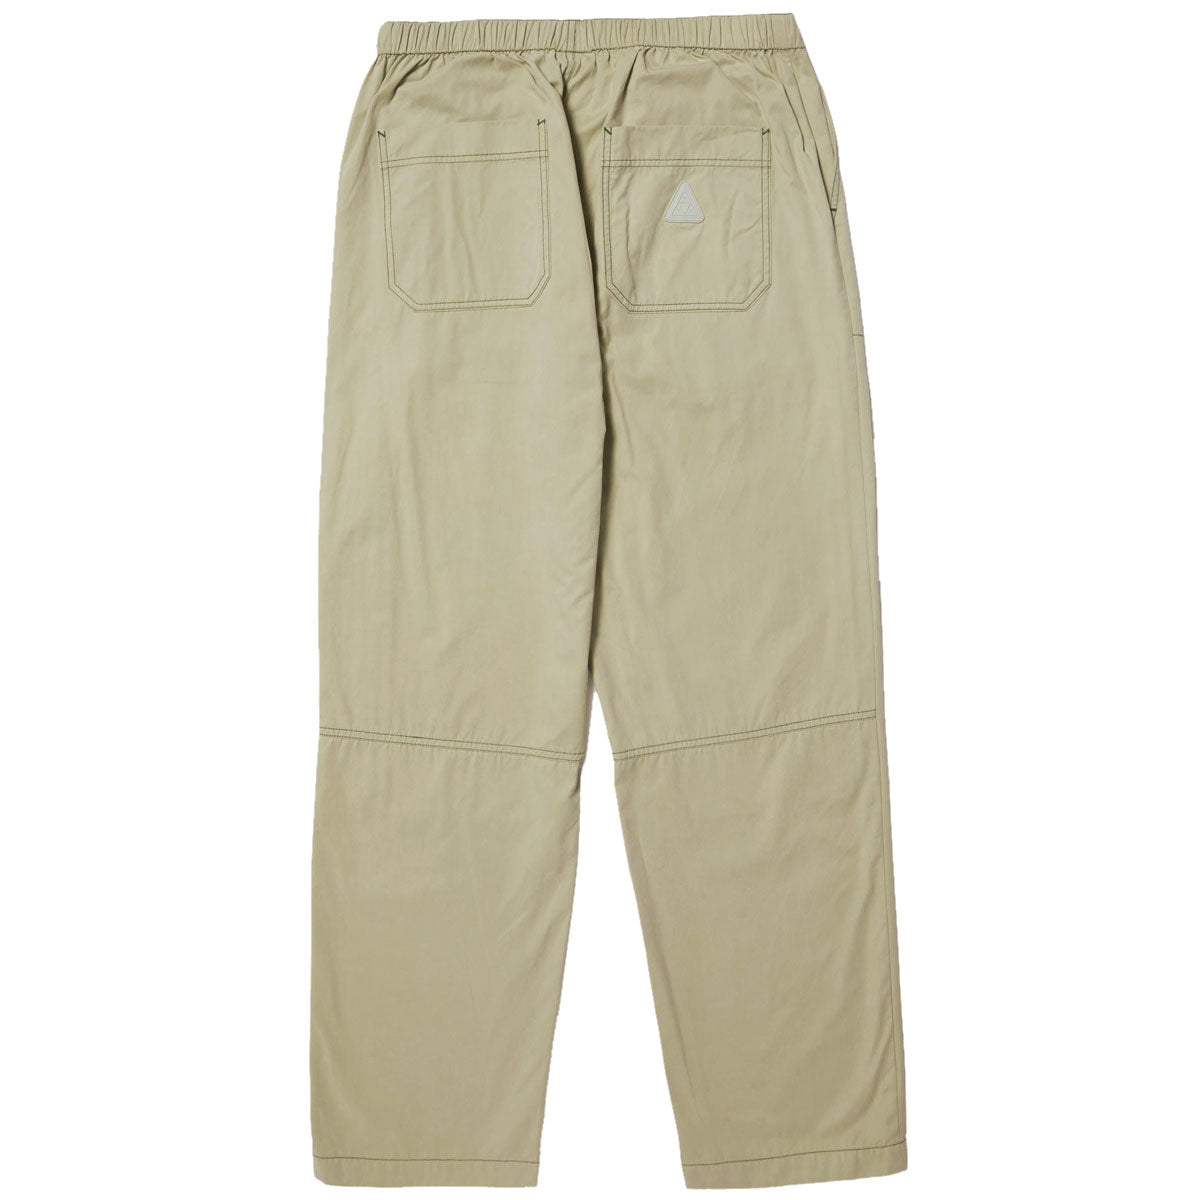 HUF Loma Tech Pants - Biscuit image 2